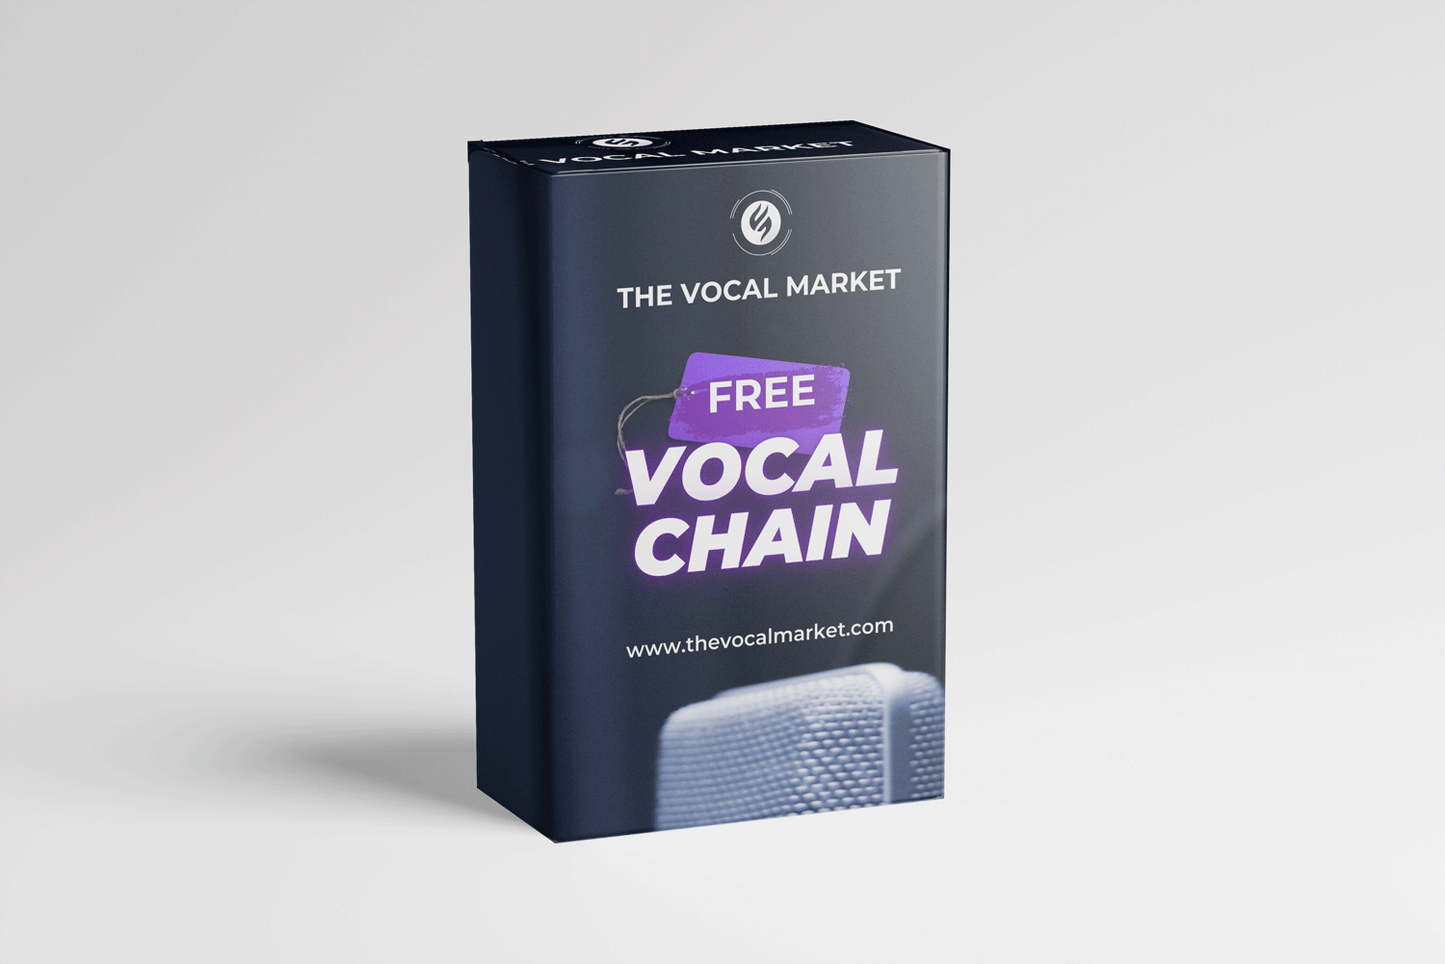 FREE Vocal Chain